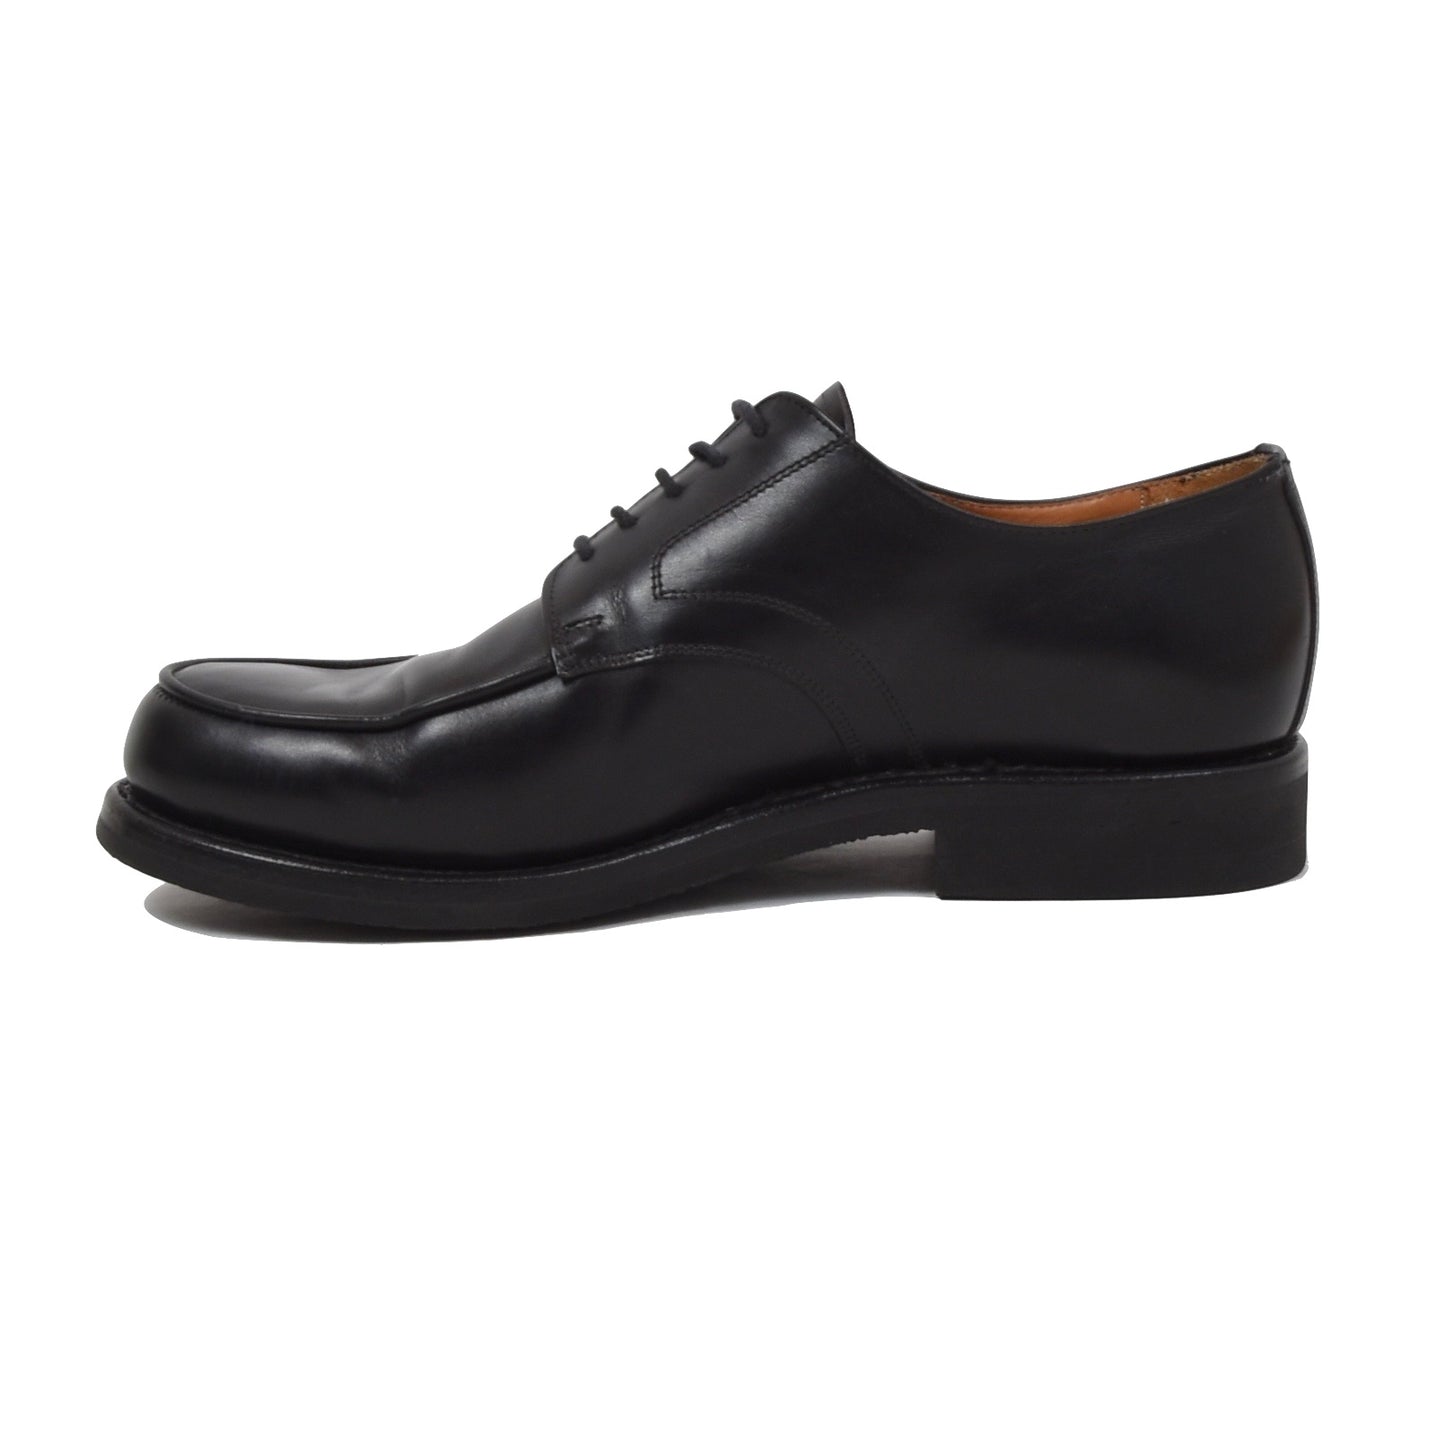 Ludwig Reiter Leather Shoes Size 9.5 - Black